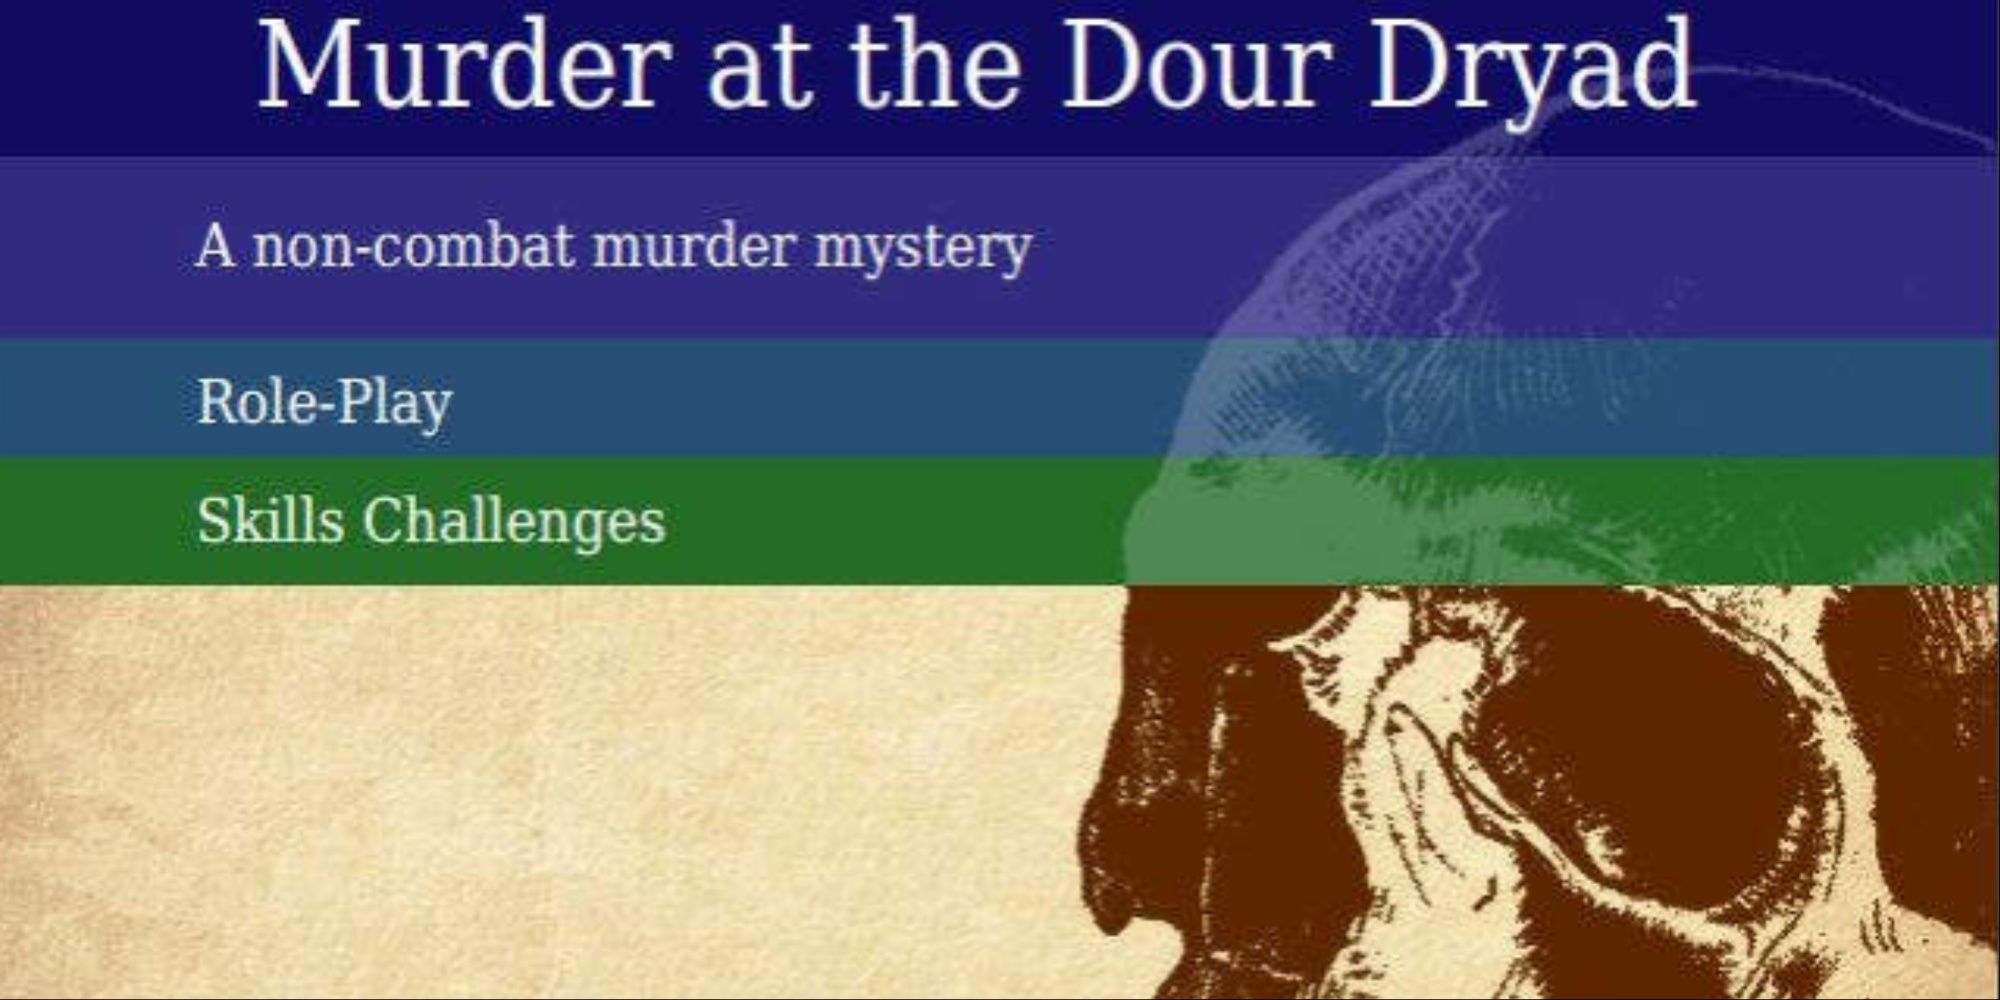 Murder at the Dour Dryad cover cropped Limitless Adventures Press